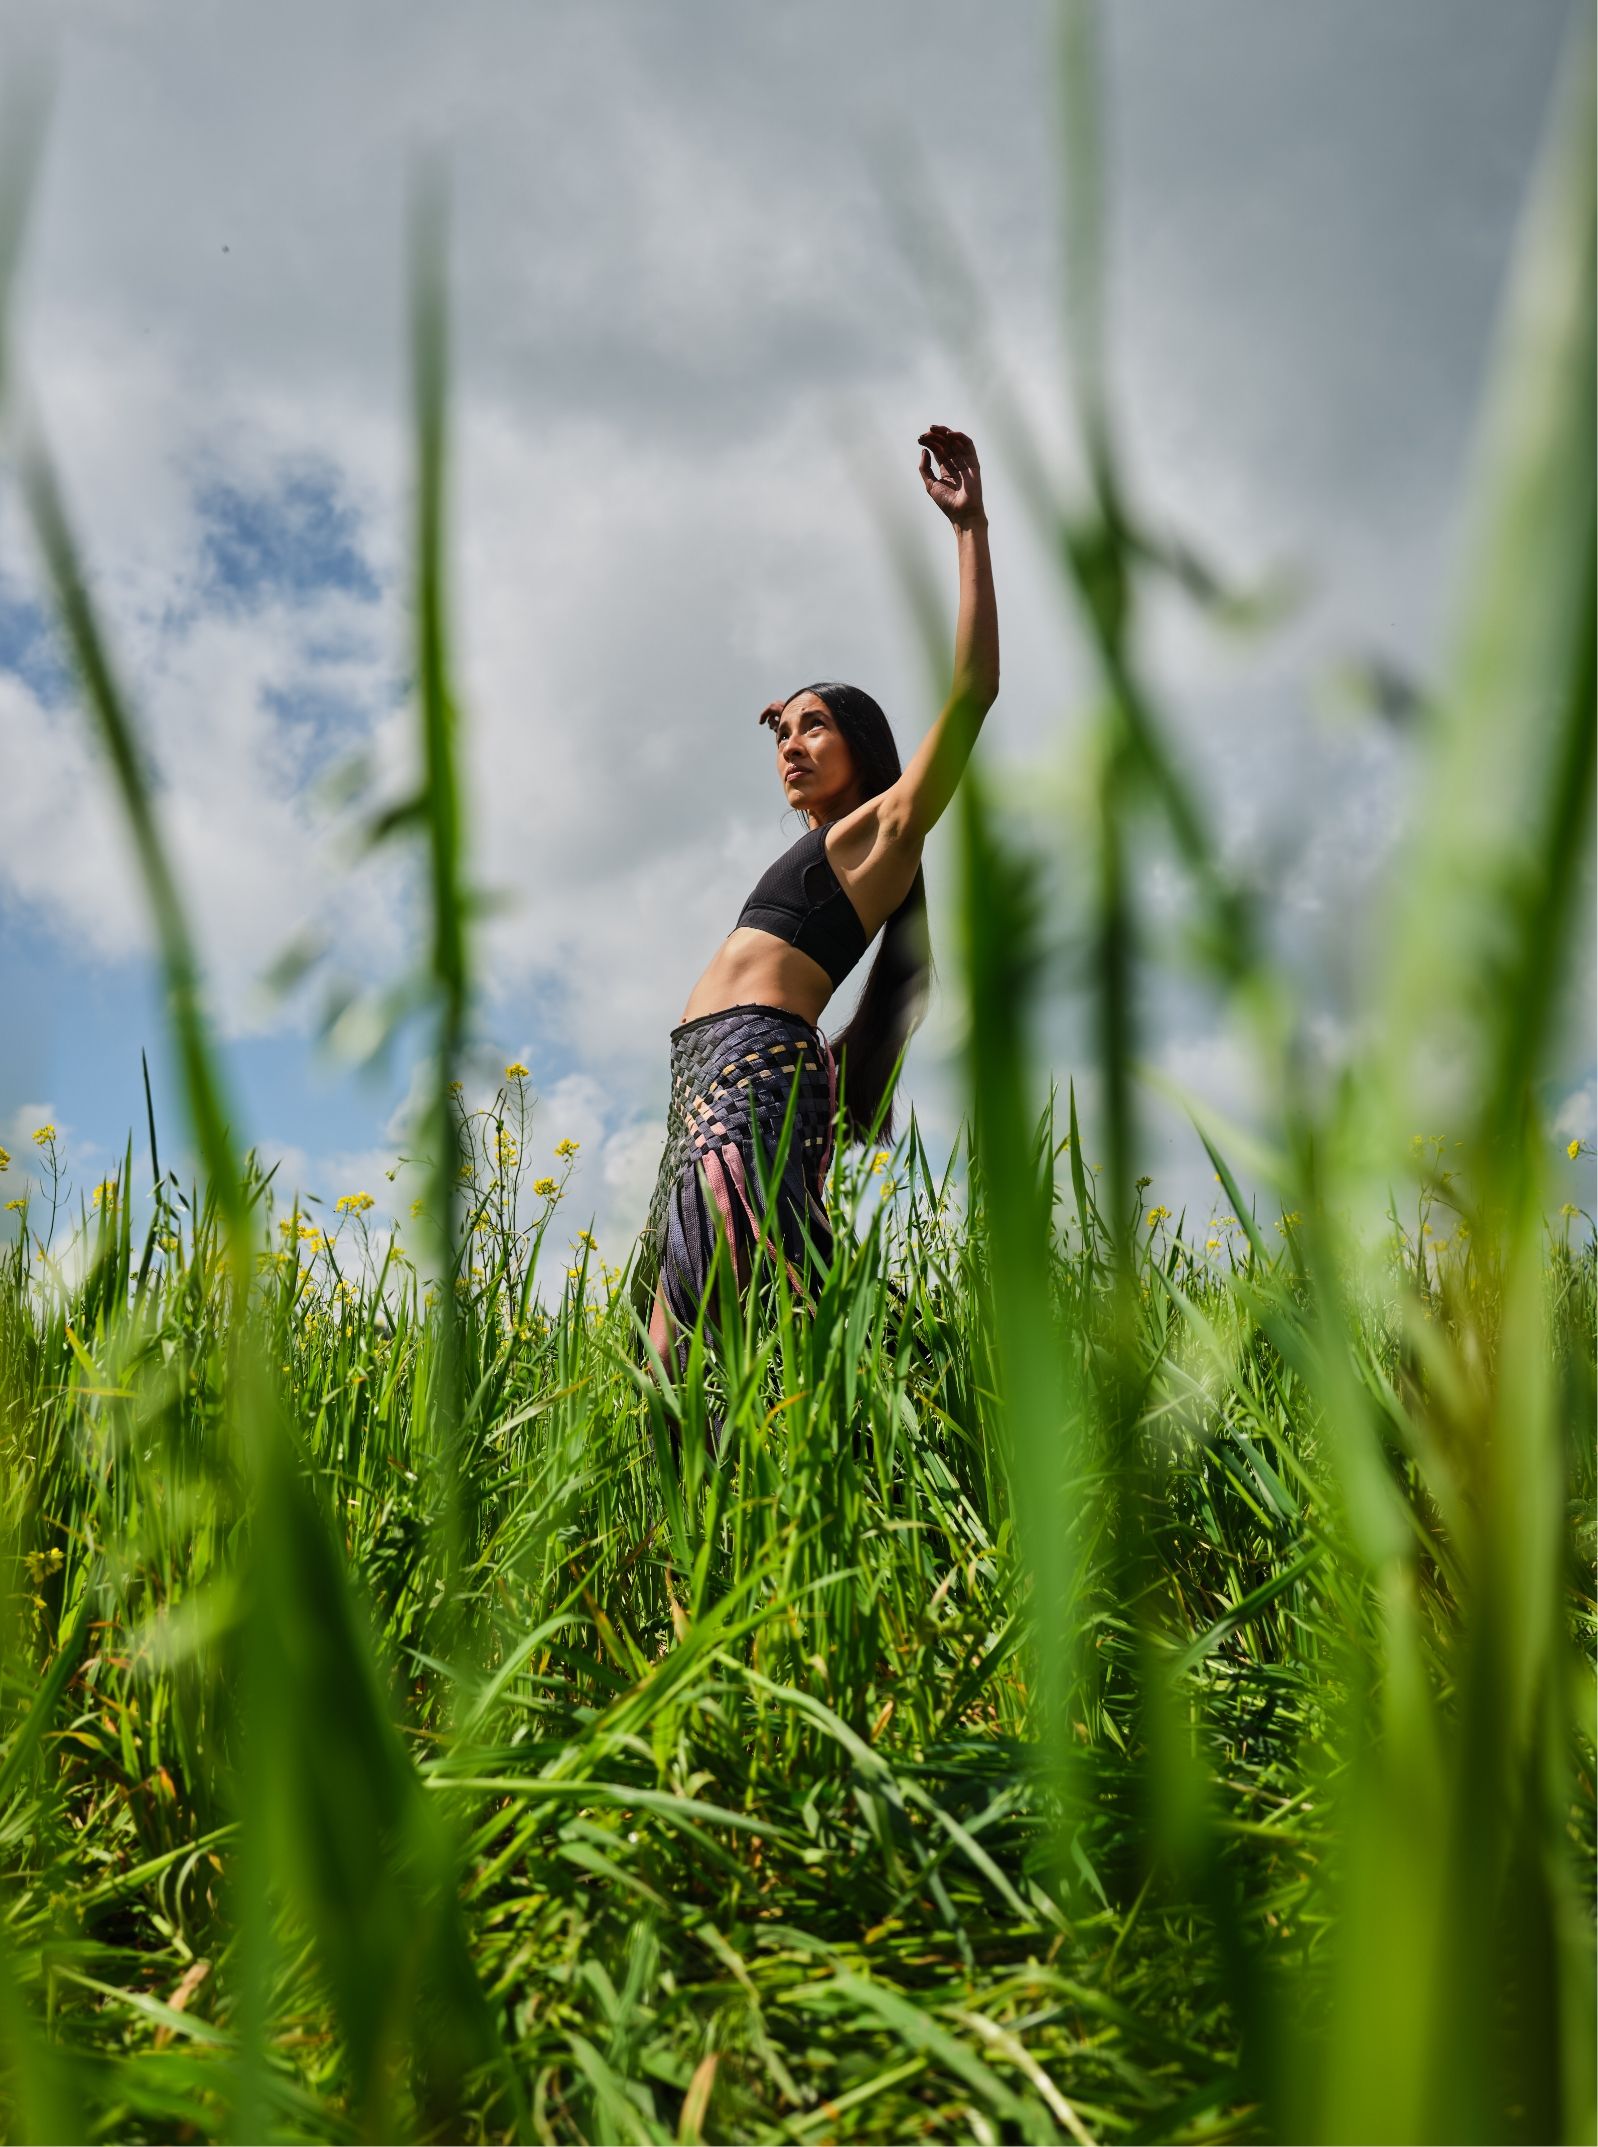 Woman in grassy field with arms raised